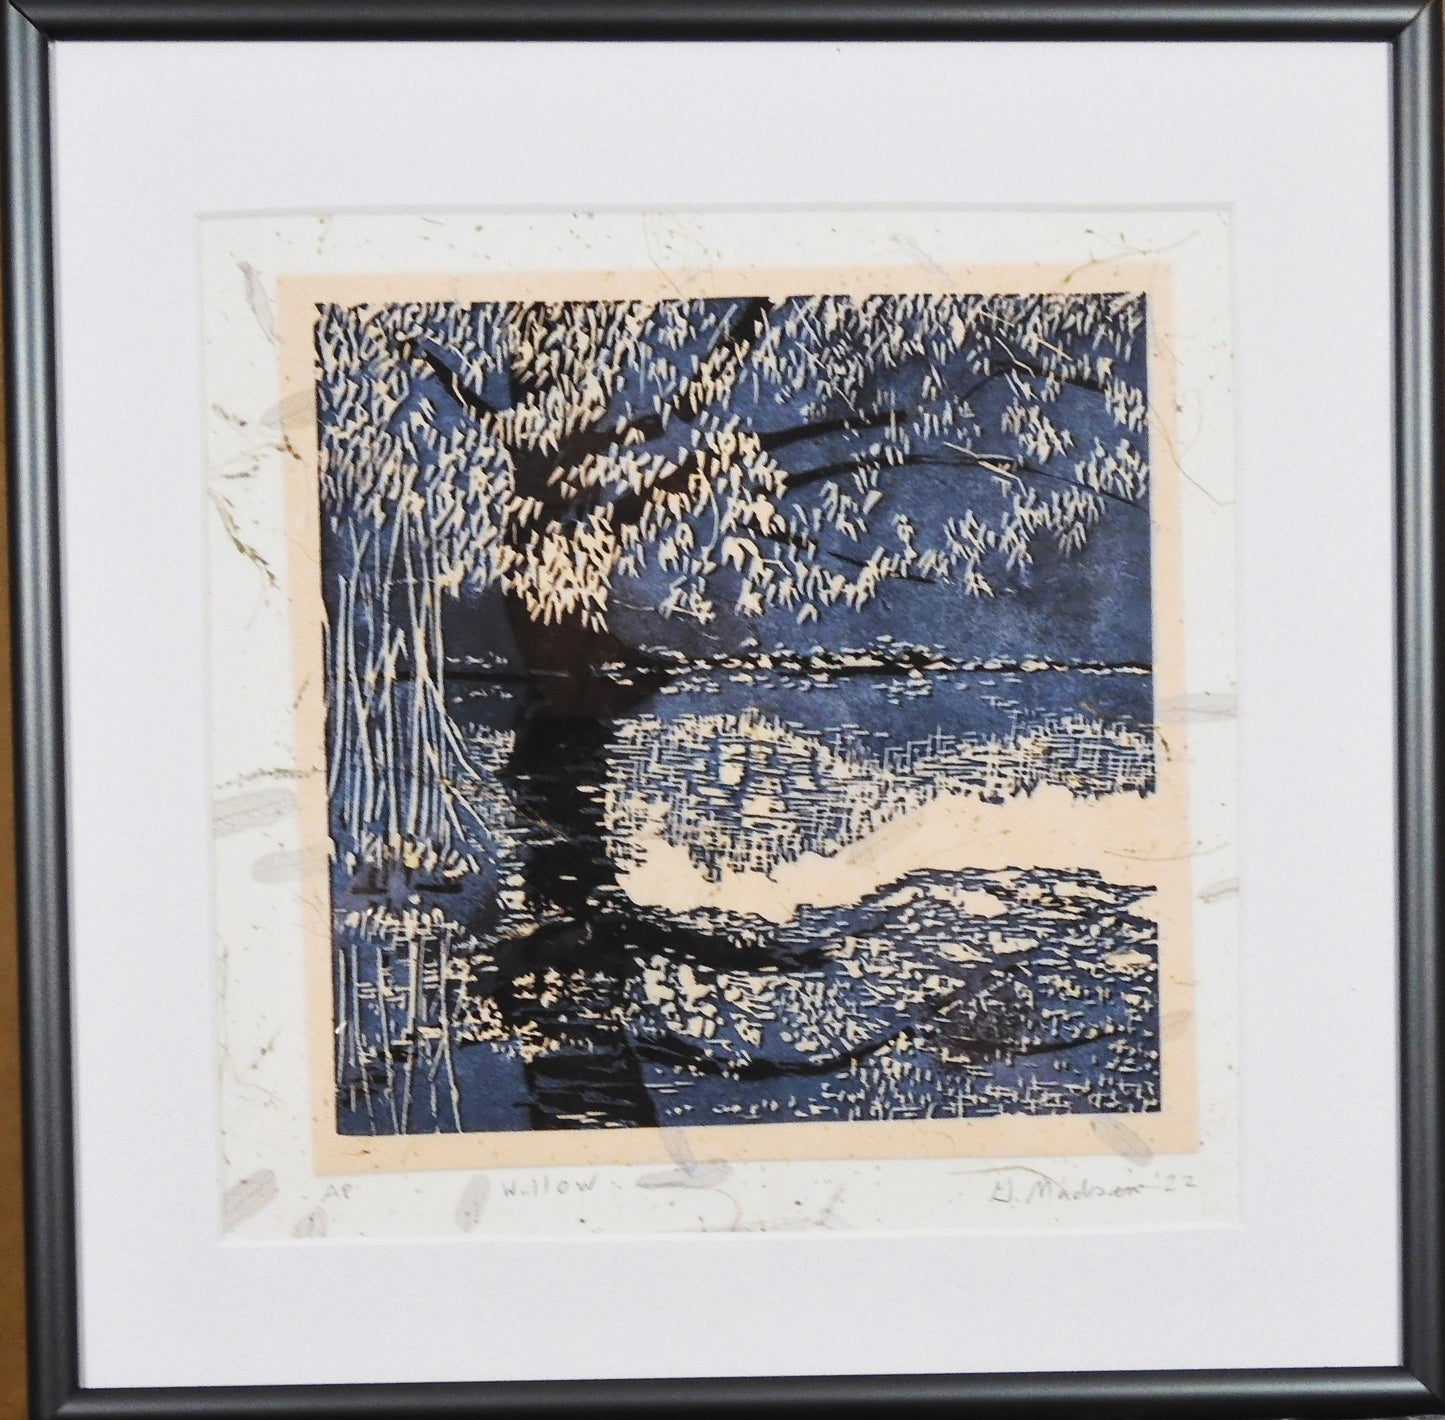 " Willow" and it's Reflection Relief Print Artist: Ginny Madsen  Willow  2022 print  Willow  - This image is based on a willow tree near a pond.   I thought the print looked like a Fall scene  I  printed it  on a textured paper that included leaves.  6" x 6" x 1 .5" Relief print  Matted  10" x 10" approximate framed size  Metal Frame